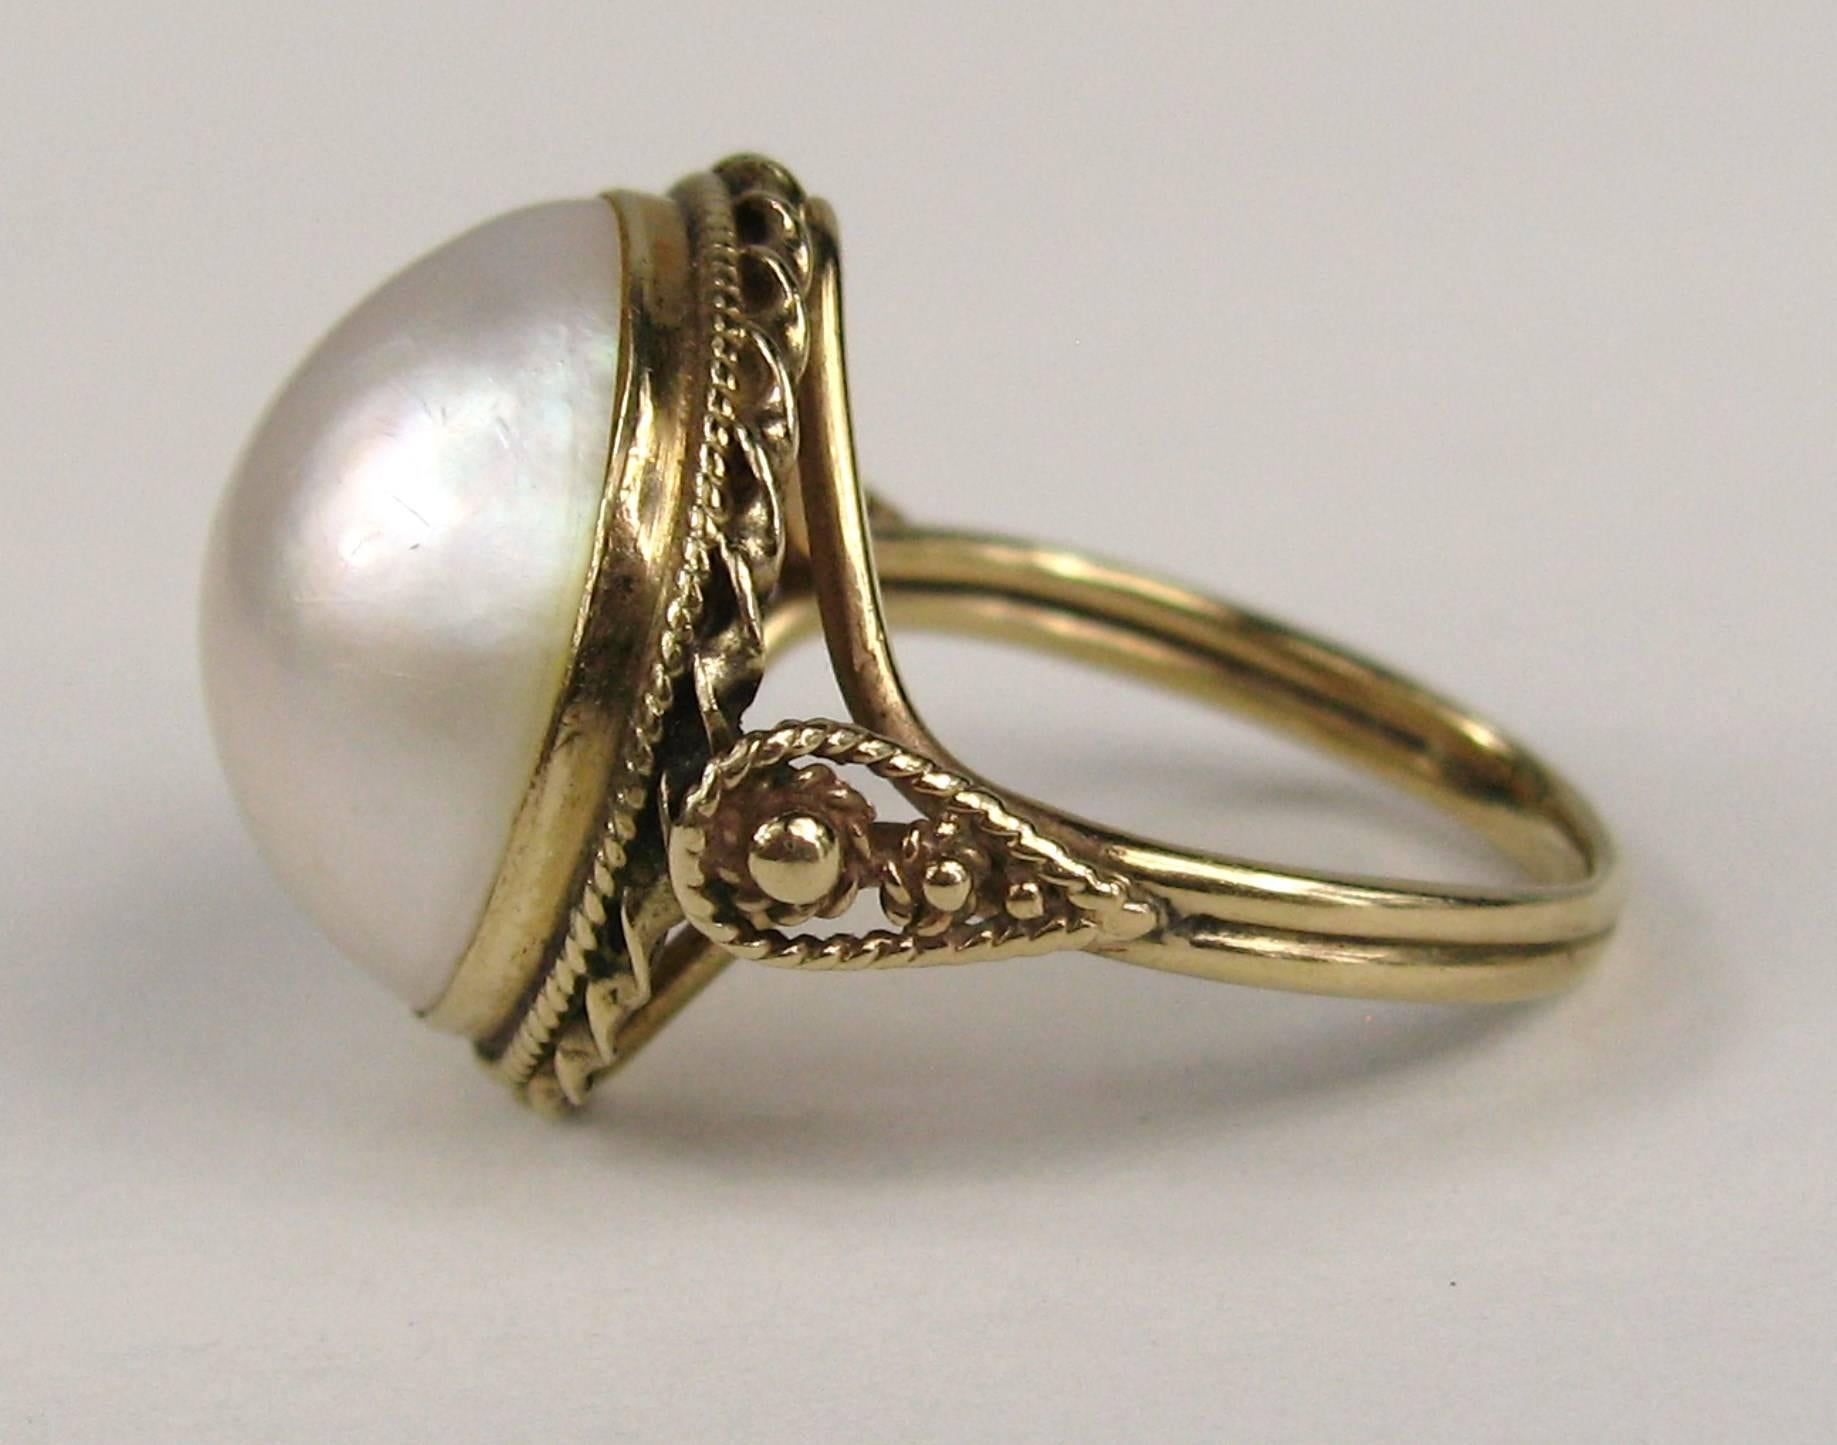 Wonderful Mabe Pearl Ring set in 14K Gold. Hand crafted setting. 17.5mm Mabe Pearl. Ring is a size 7-3/4. Ring can be size by us or by your jeweler.  This is out of our massive collection of Hopi, Zuni, Navajo, Southwestern, sterling silver, costume